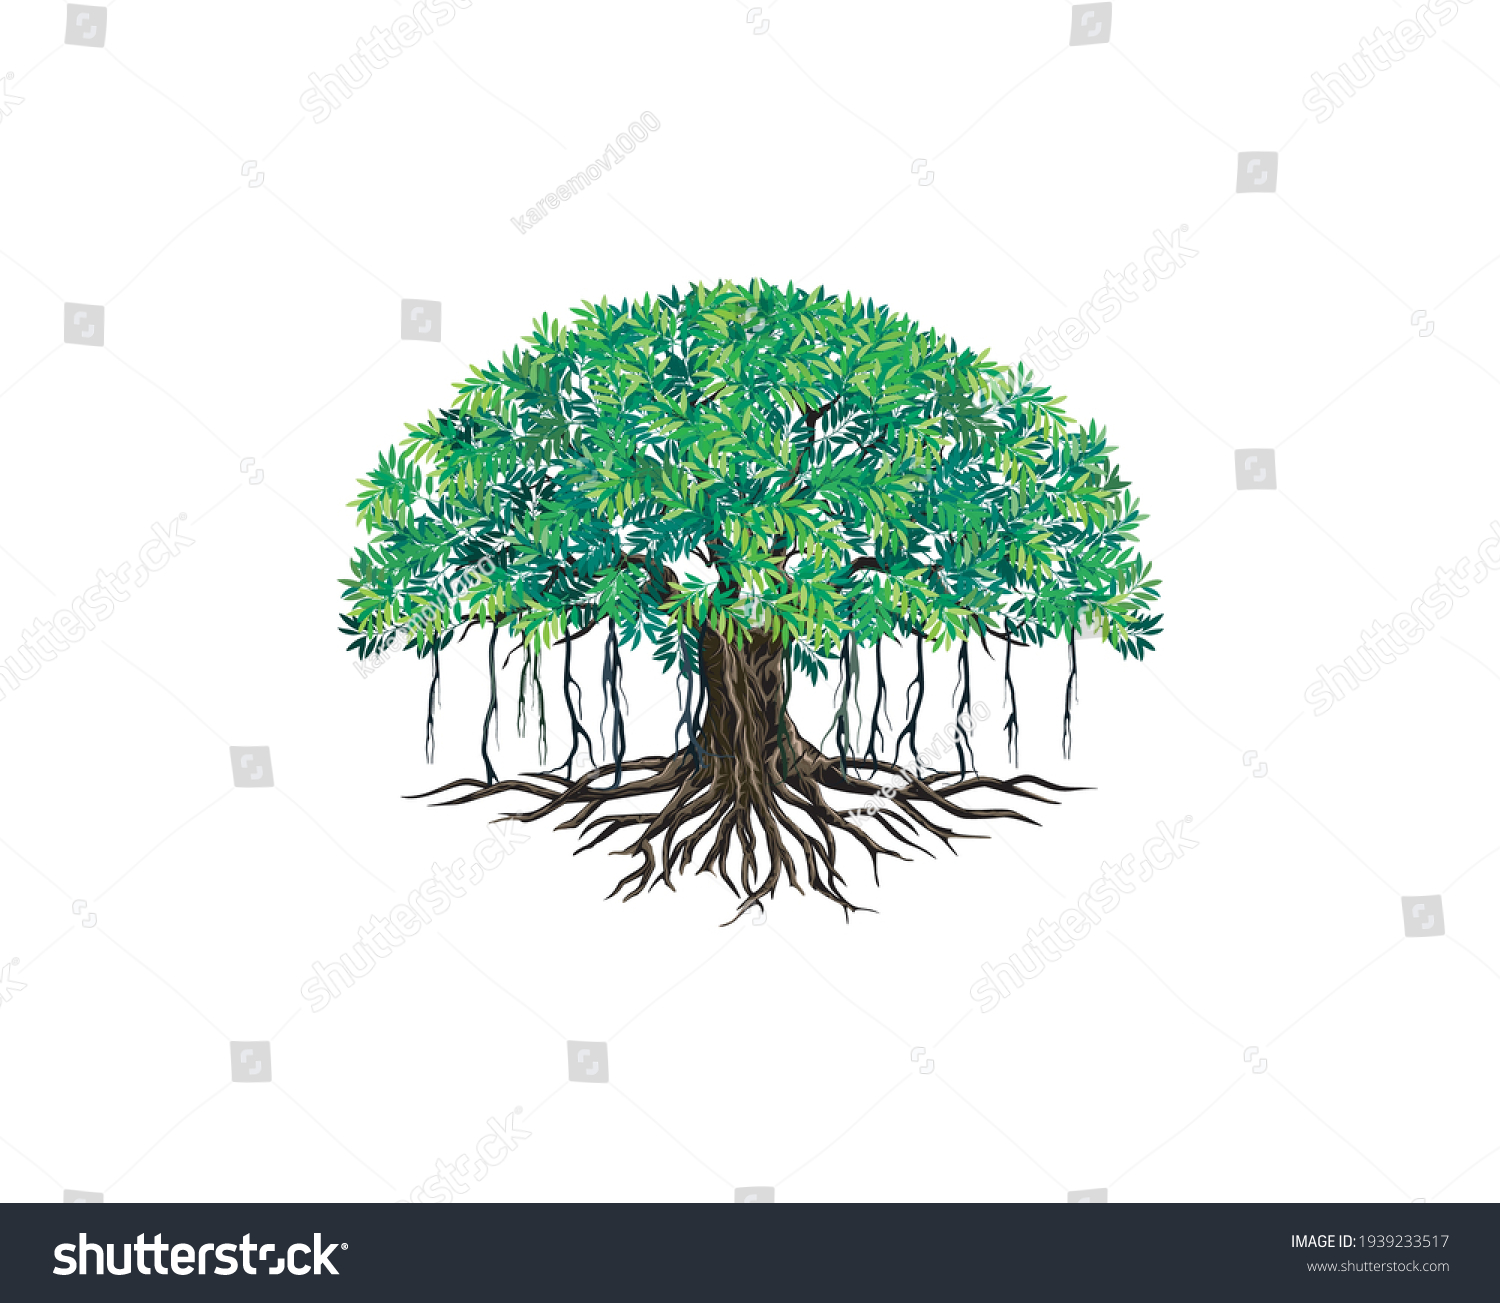 SVG of Banyan tree vector illustrations isolated on white. svg